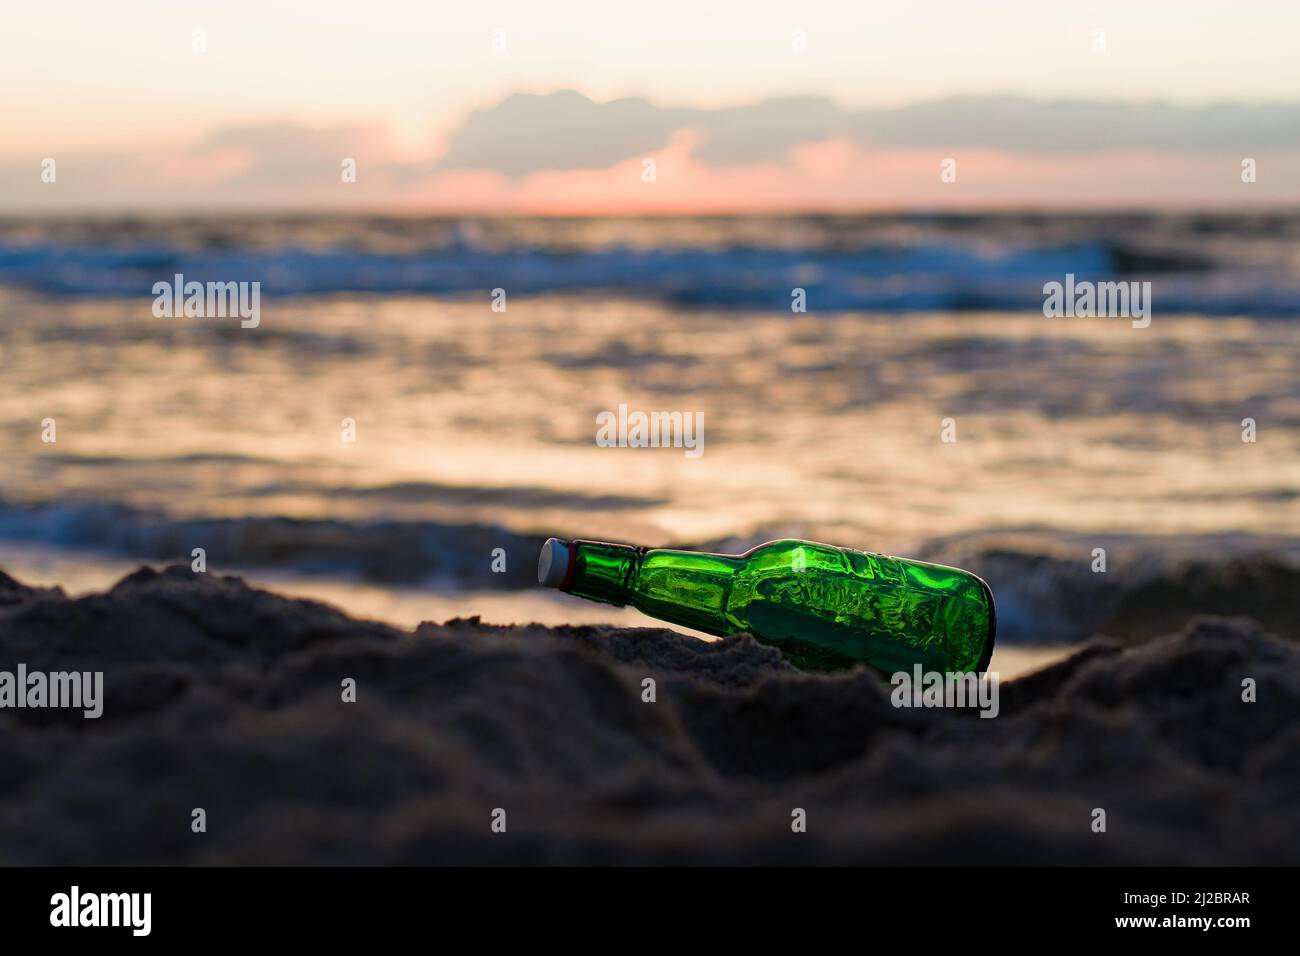 Message in the bottle washed ashore against soft waves. Dreamy ideas concept Stock Photo